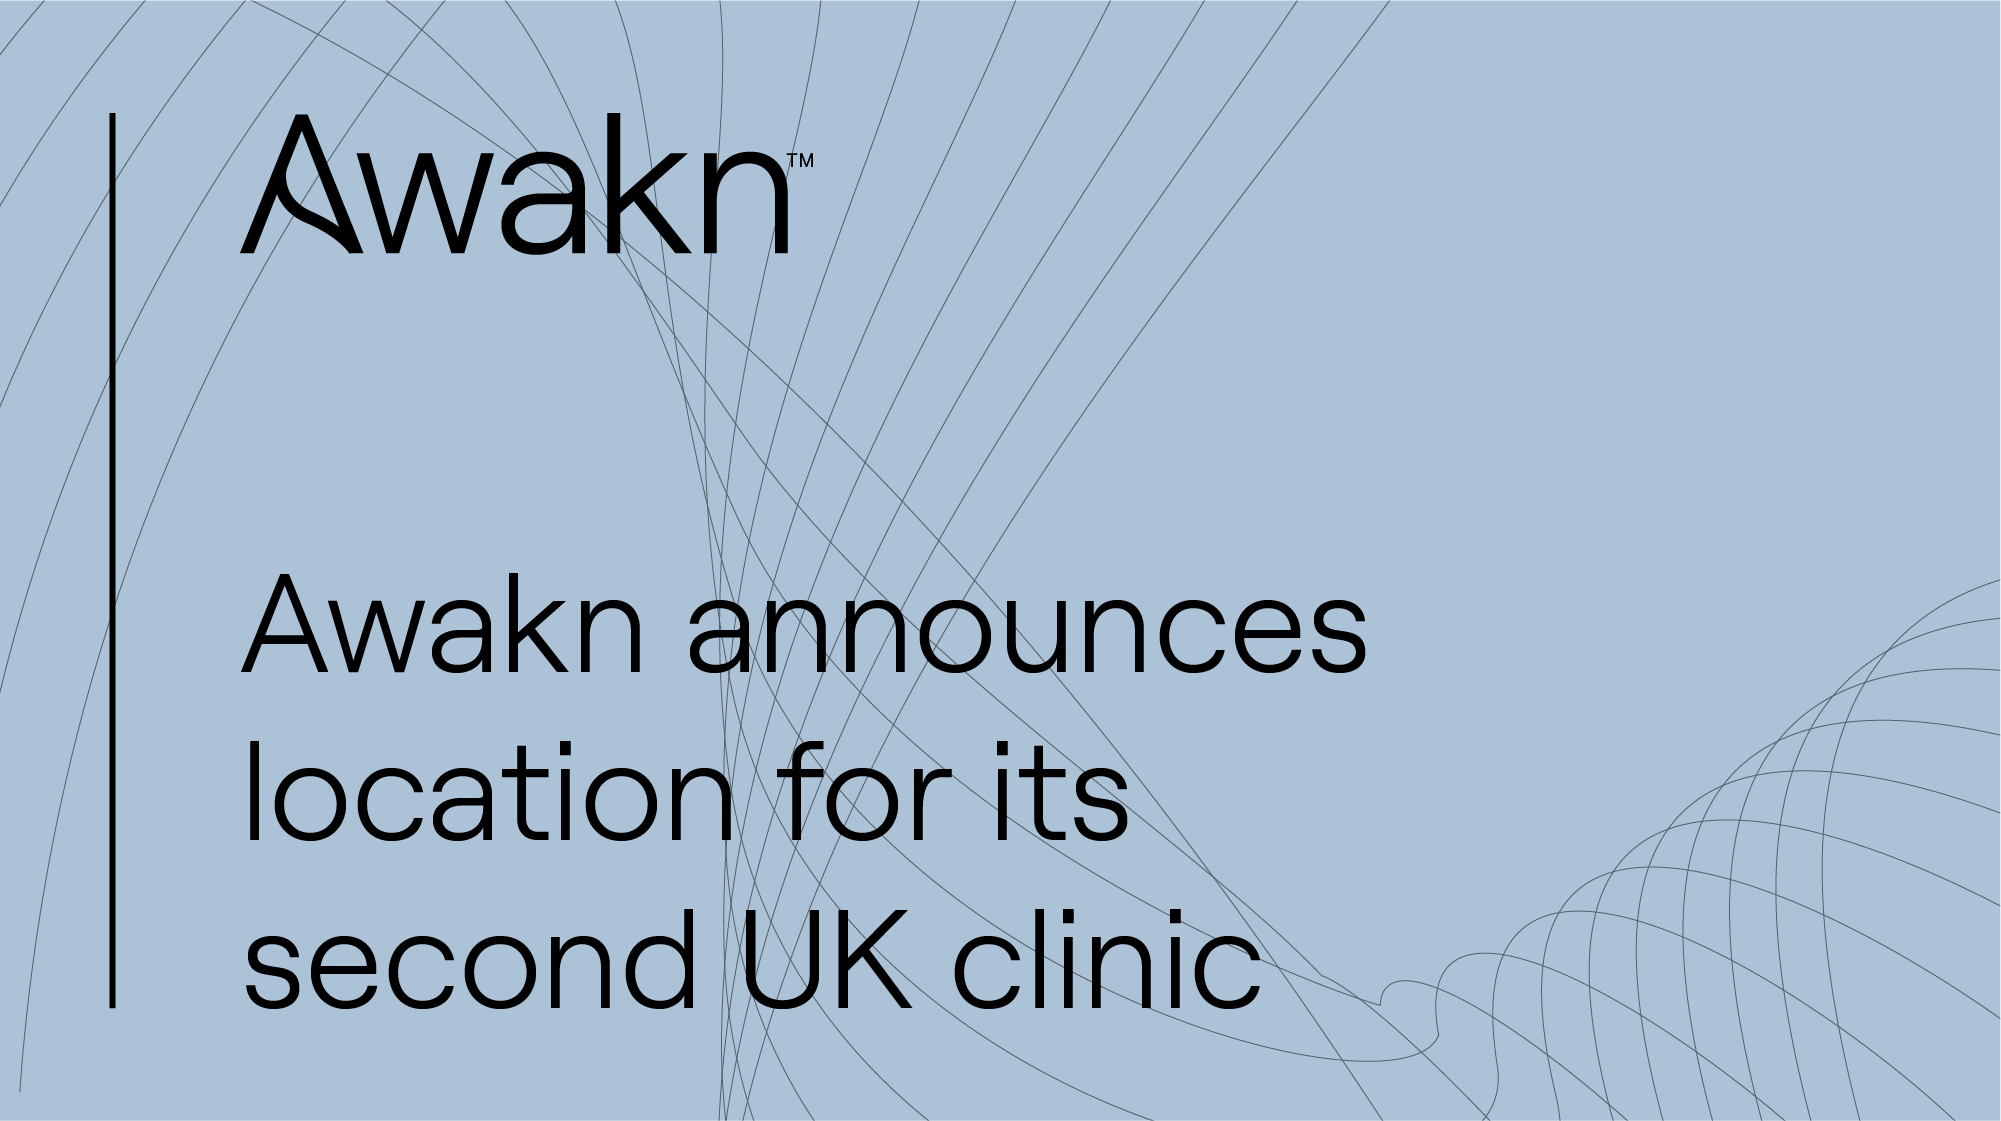 Awakn announces location for its second UK clinic